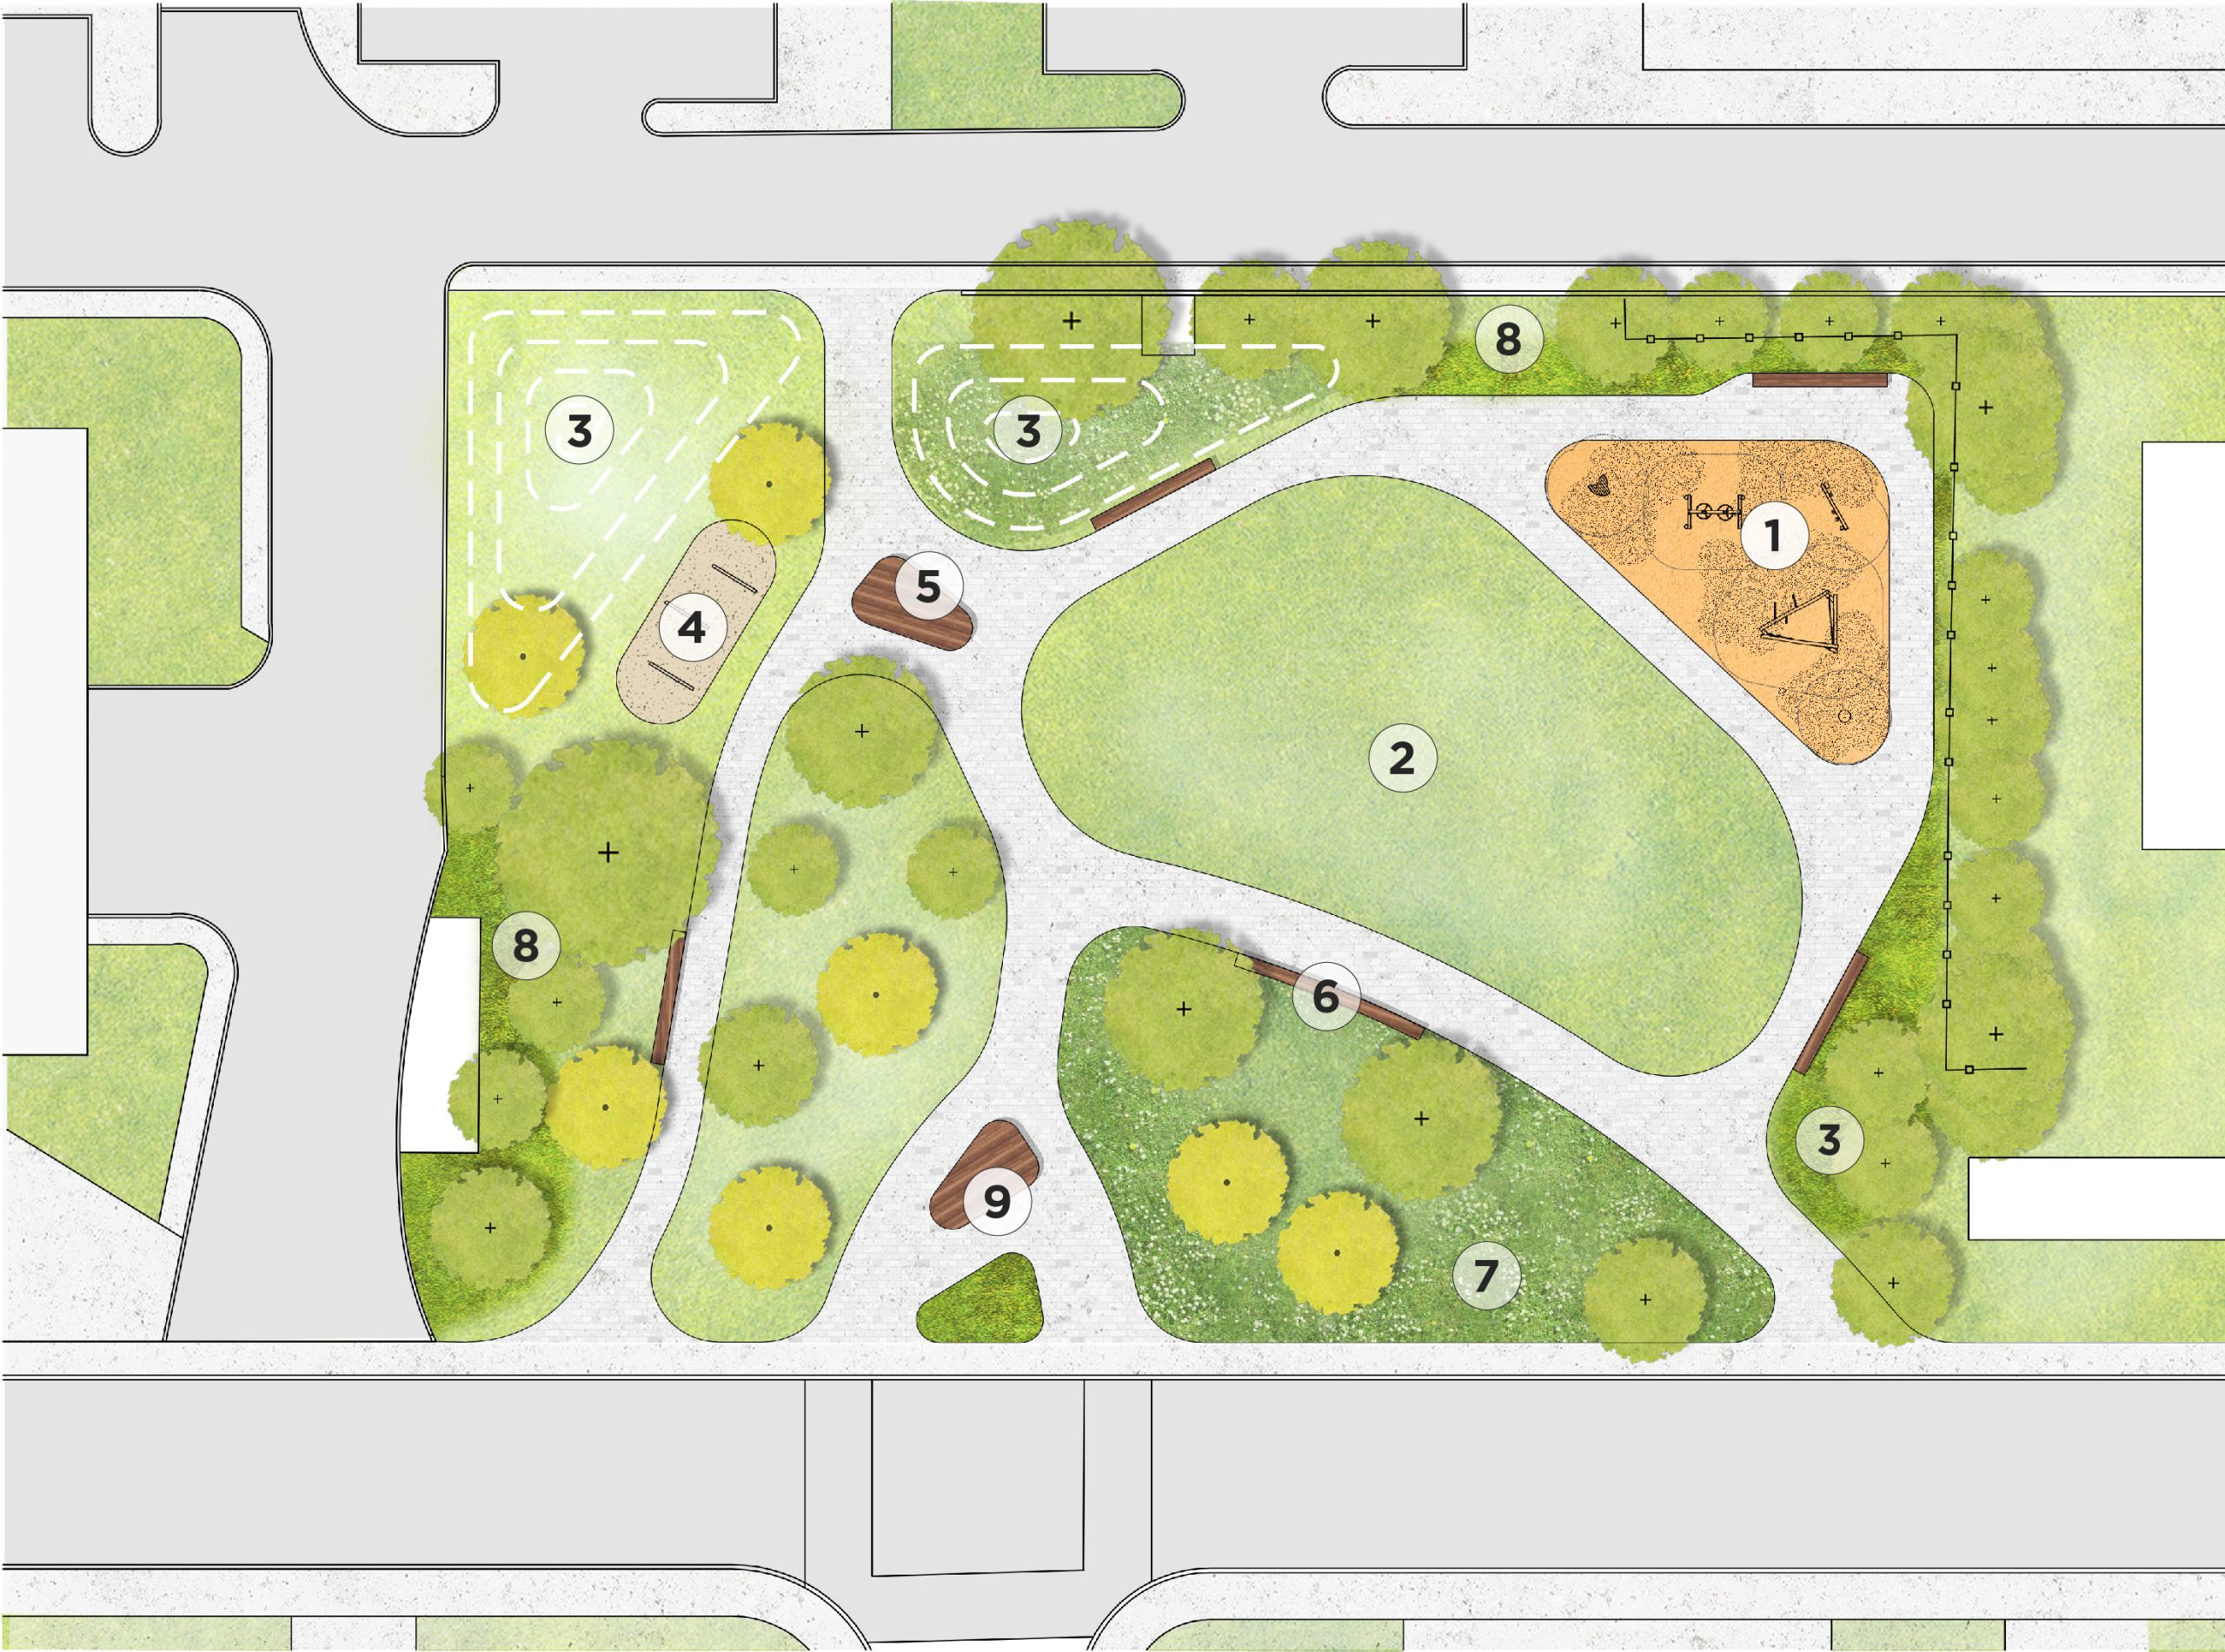 Aerial view of the design option for the parkette, with the main park entrance from Erskine Avenue where multiple defined pathways lead to activity areas. From the bottom left corner to top right corner, a south entrance adjacent to a meadow and landforms, benches, shrubs and grasses, an open lawn at the centre with platform seating and fitness equipment to the west, and a playground at the top right corner.